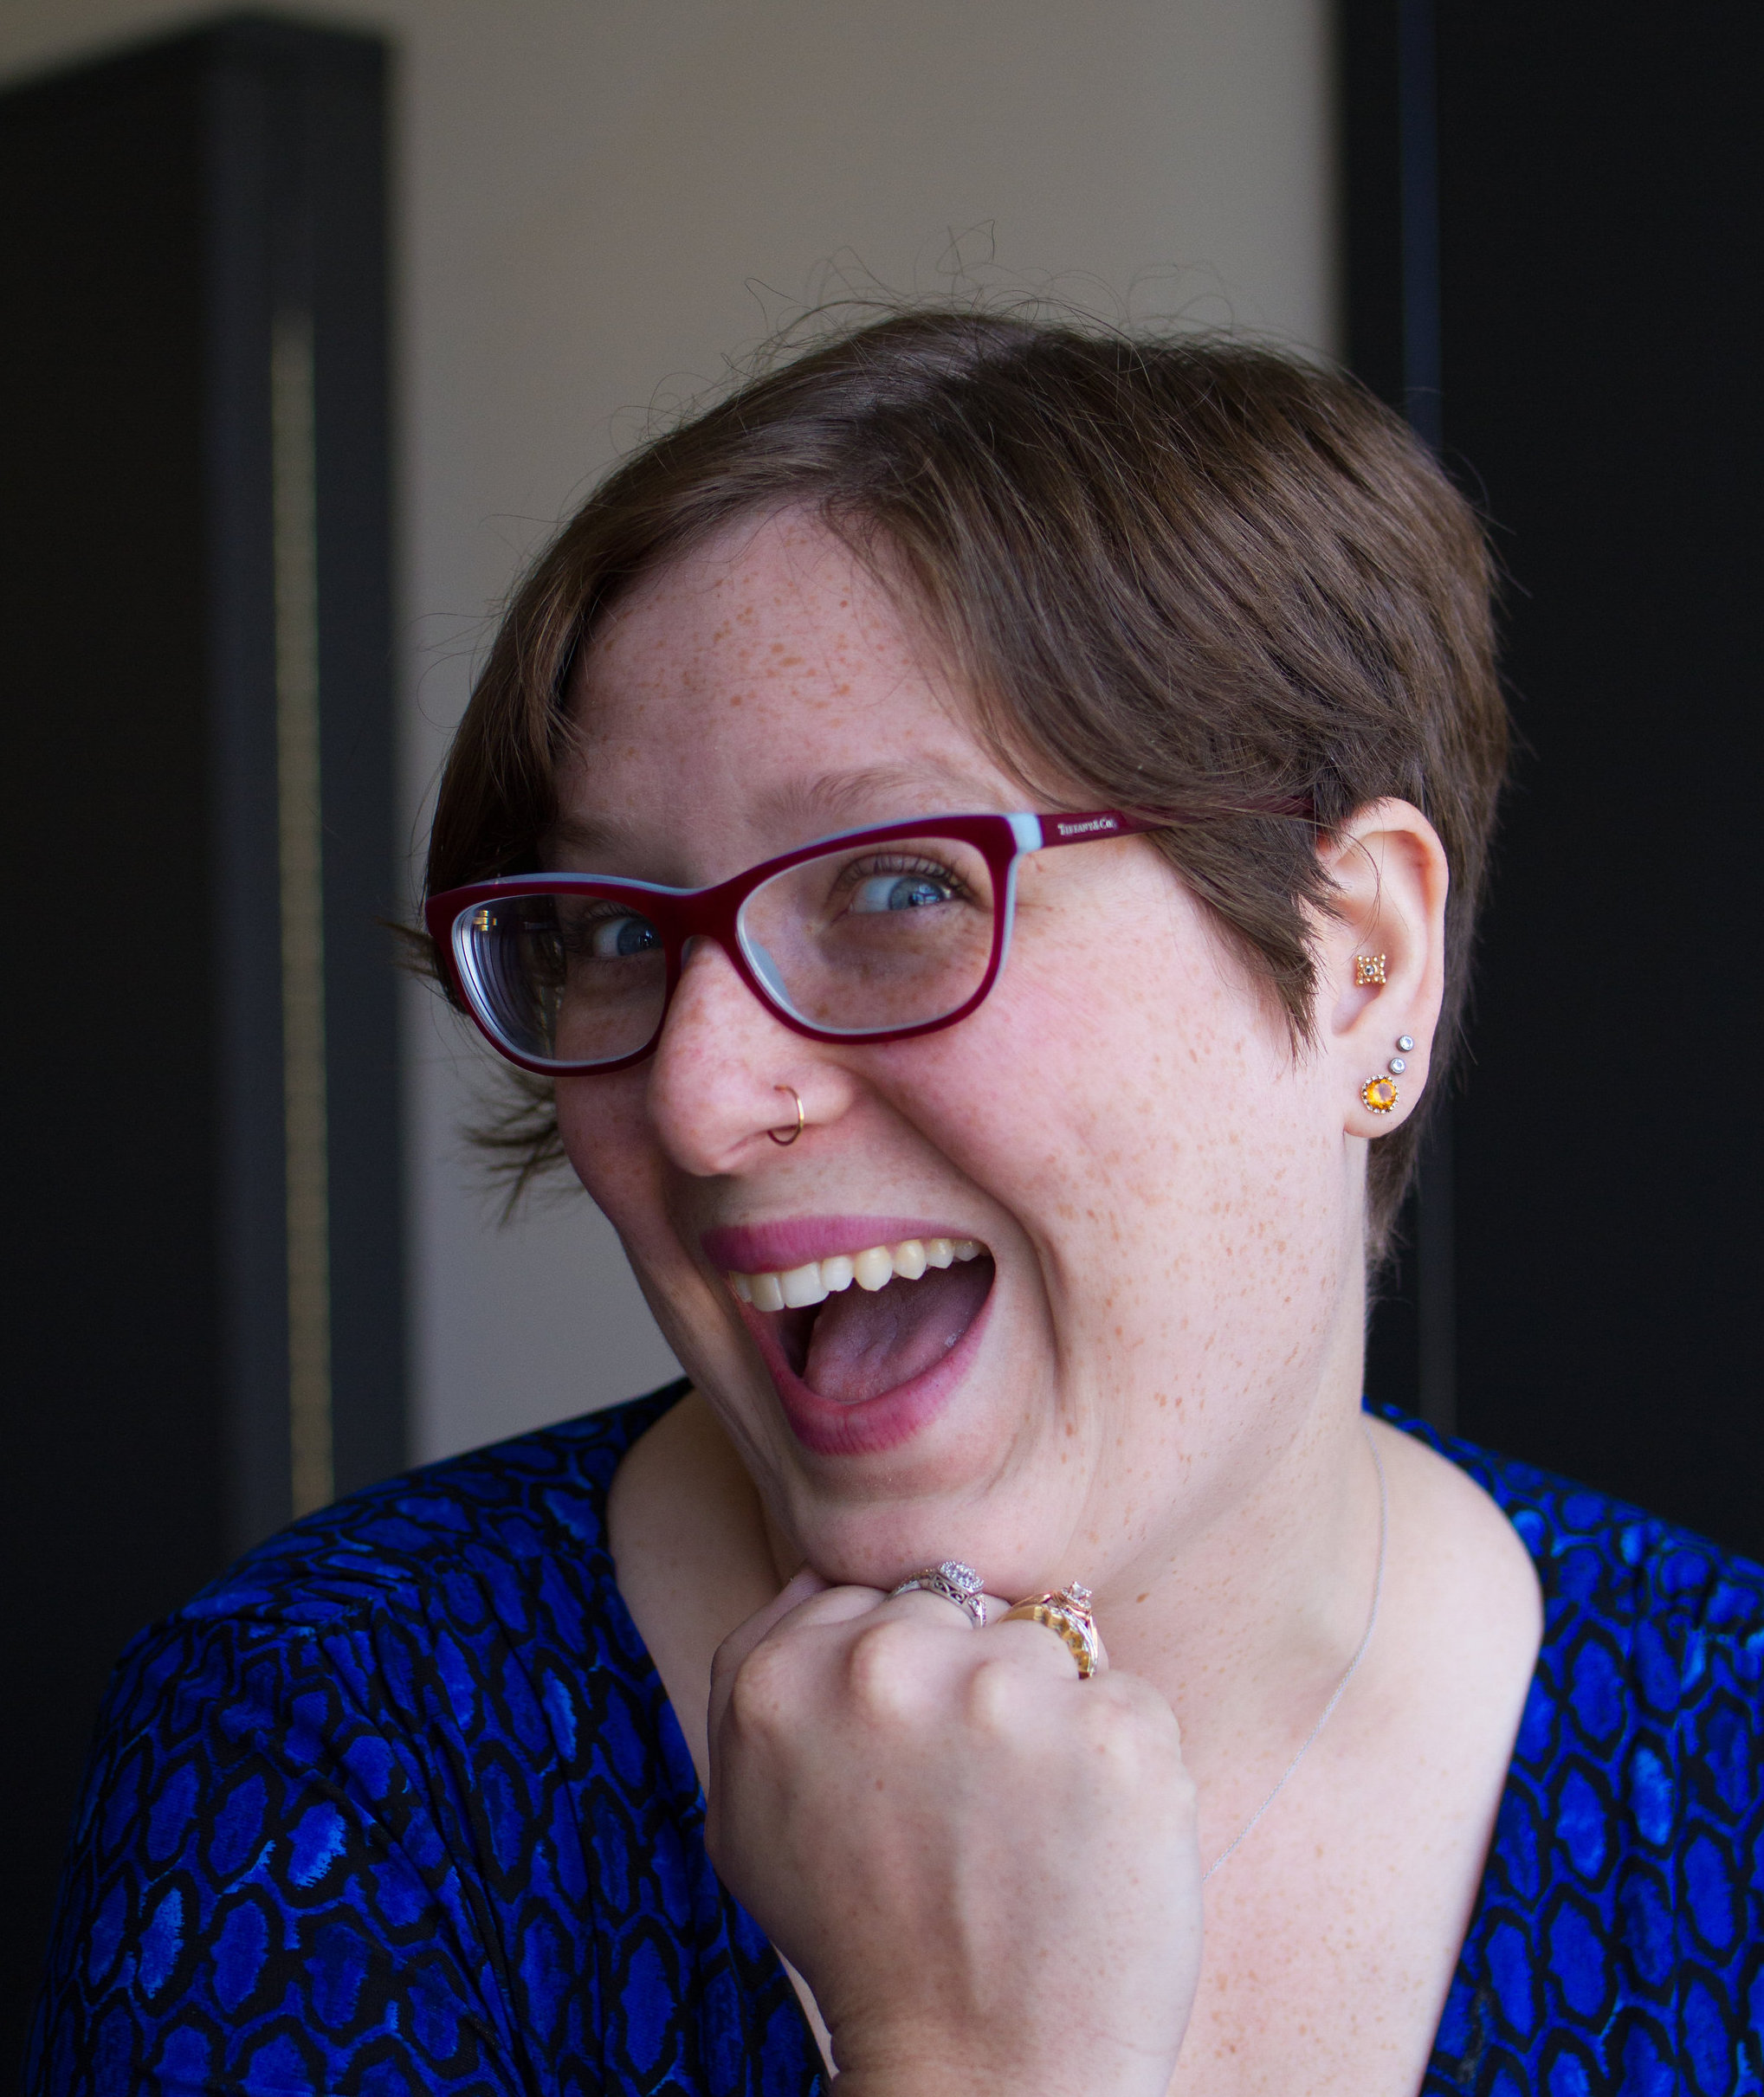 Photograph of a white woman with short hair smiling at the camera. She’s making a silly face and resting her head on her hand.